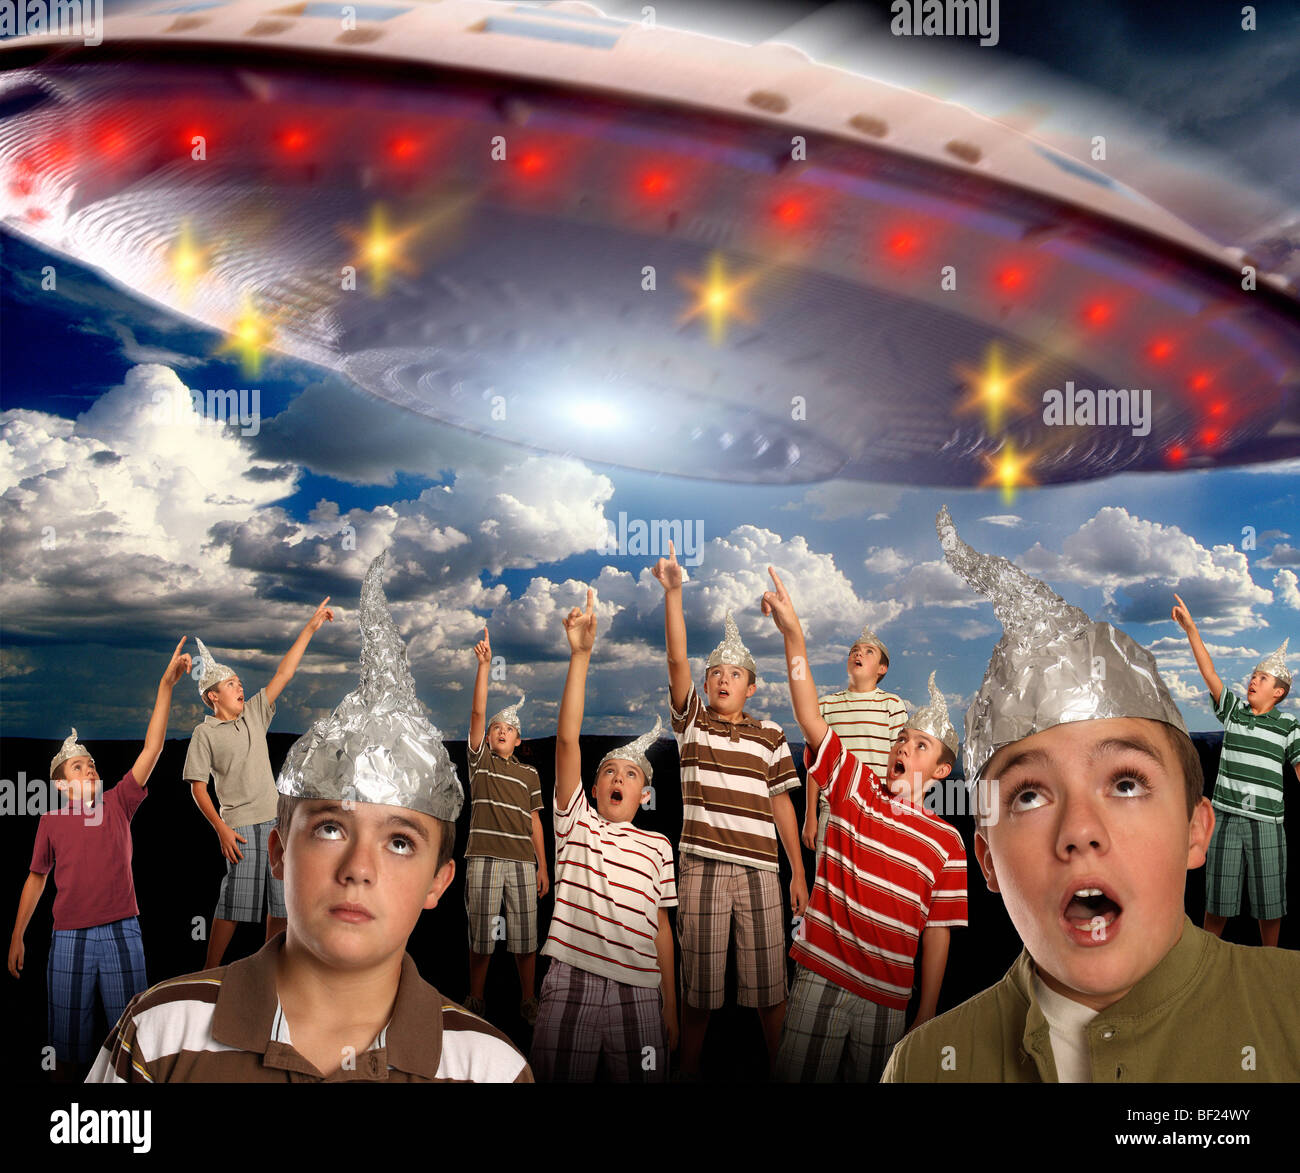 A group of CLONES wearing tin-foil hats points to a giant UFO in the sky! Stock Photo